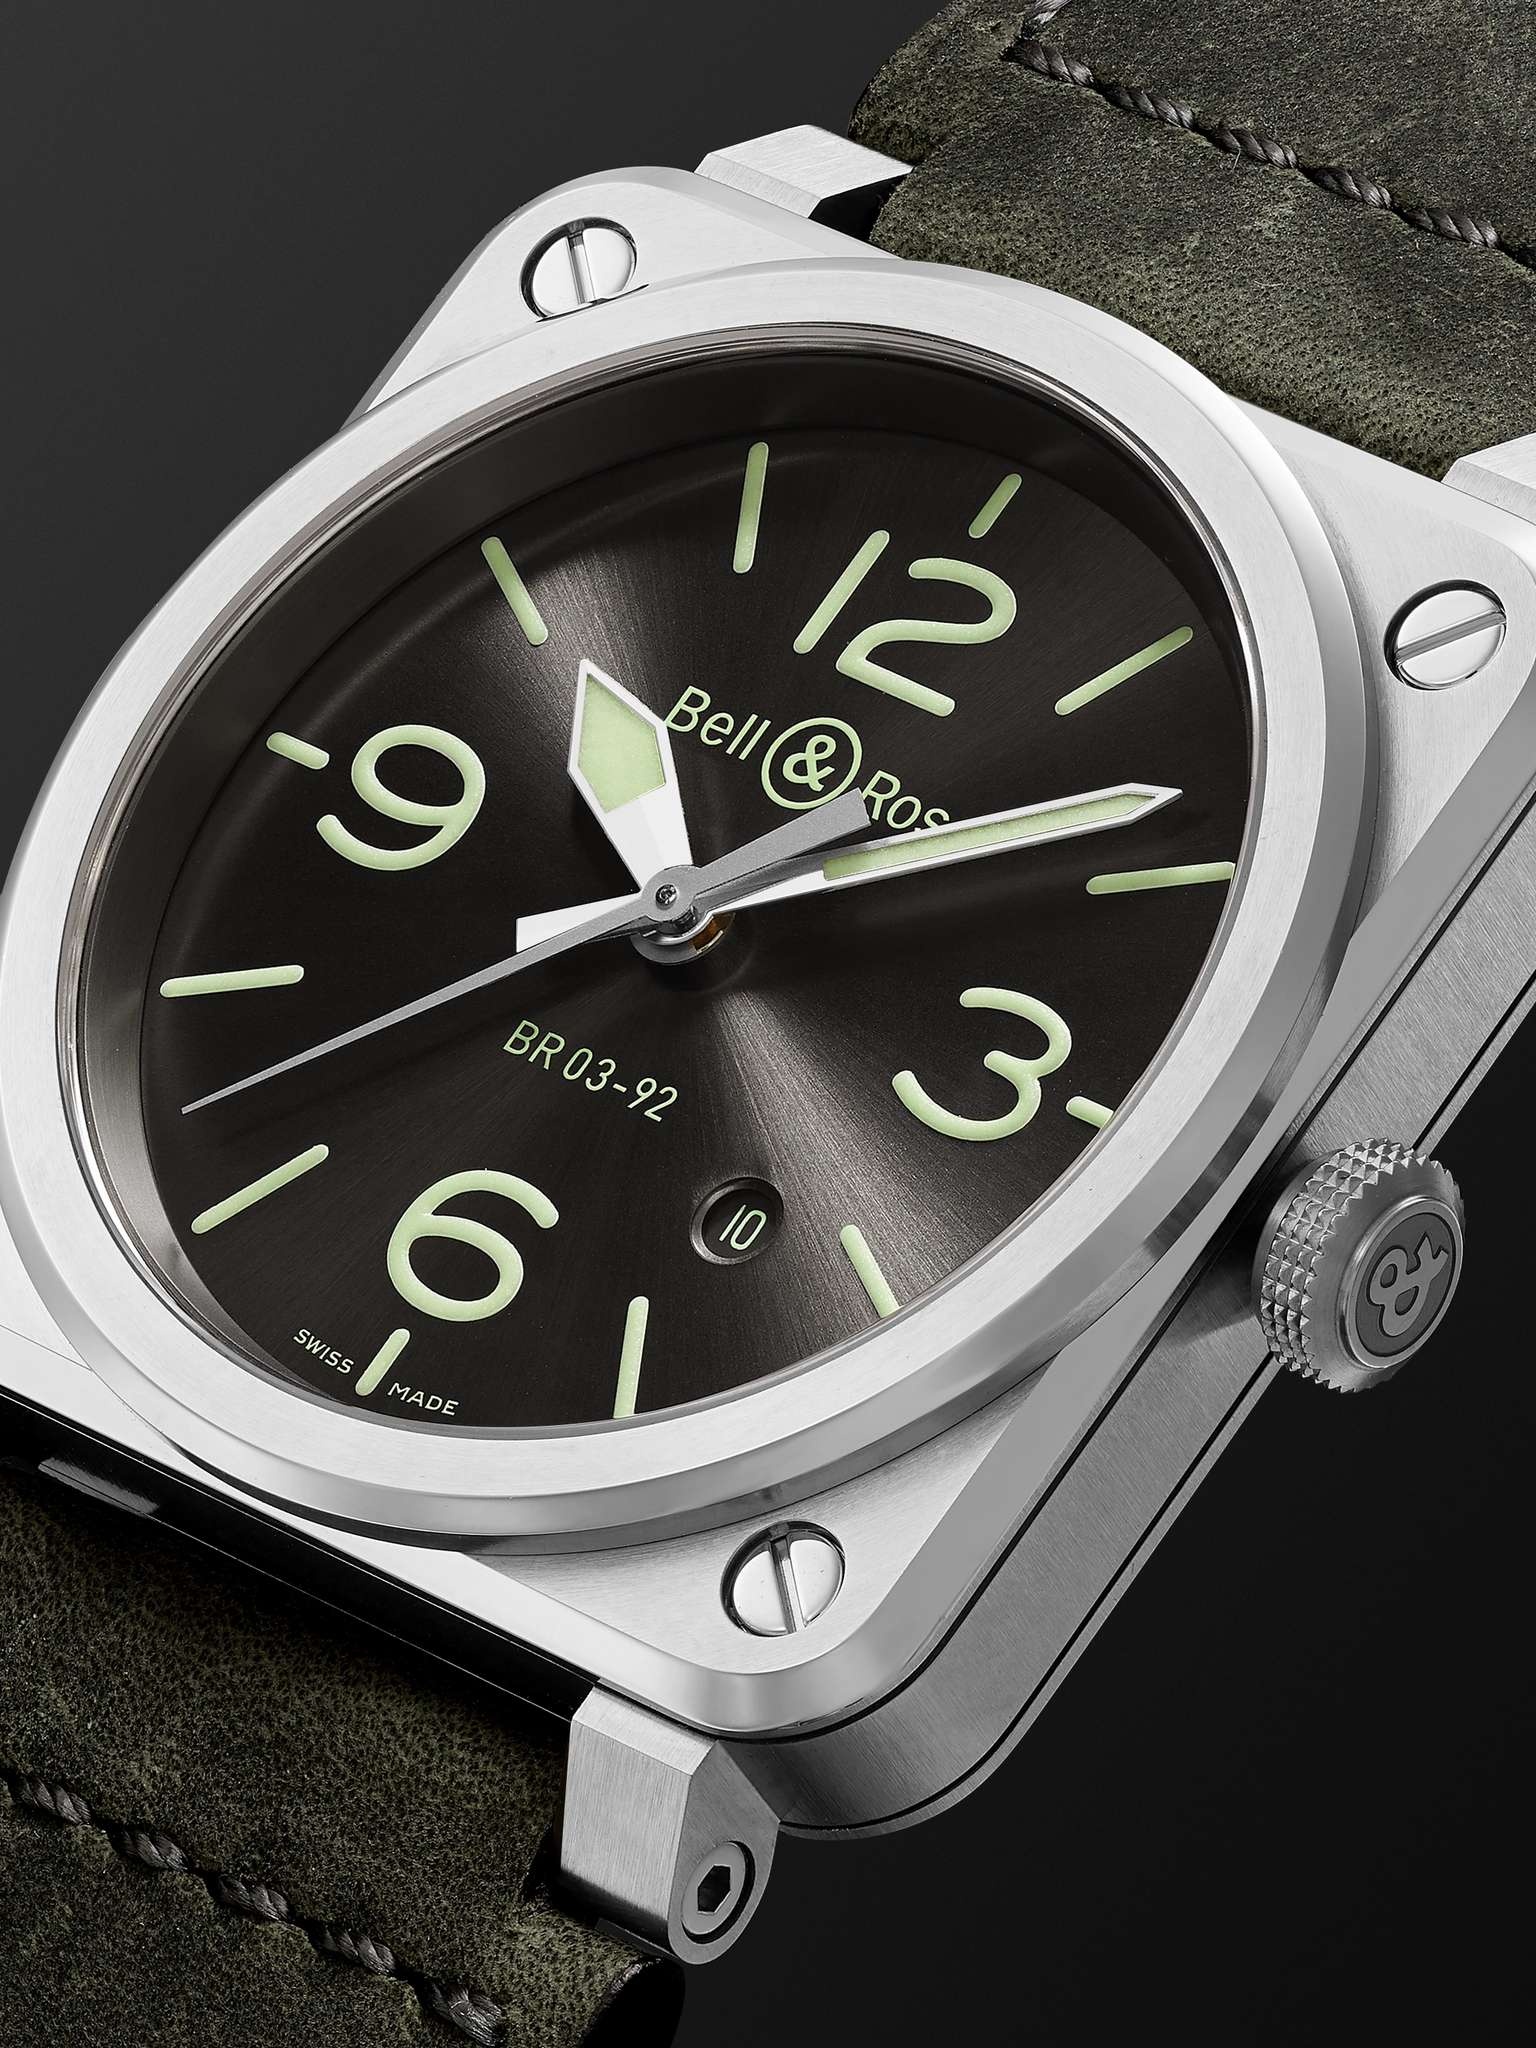 BR 03-92 Grey Lum Automatic 42mm Stainless Steel and Leather Watch, Ref. No. BR0392-GC3-ST/SCA - 3